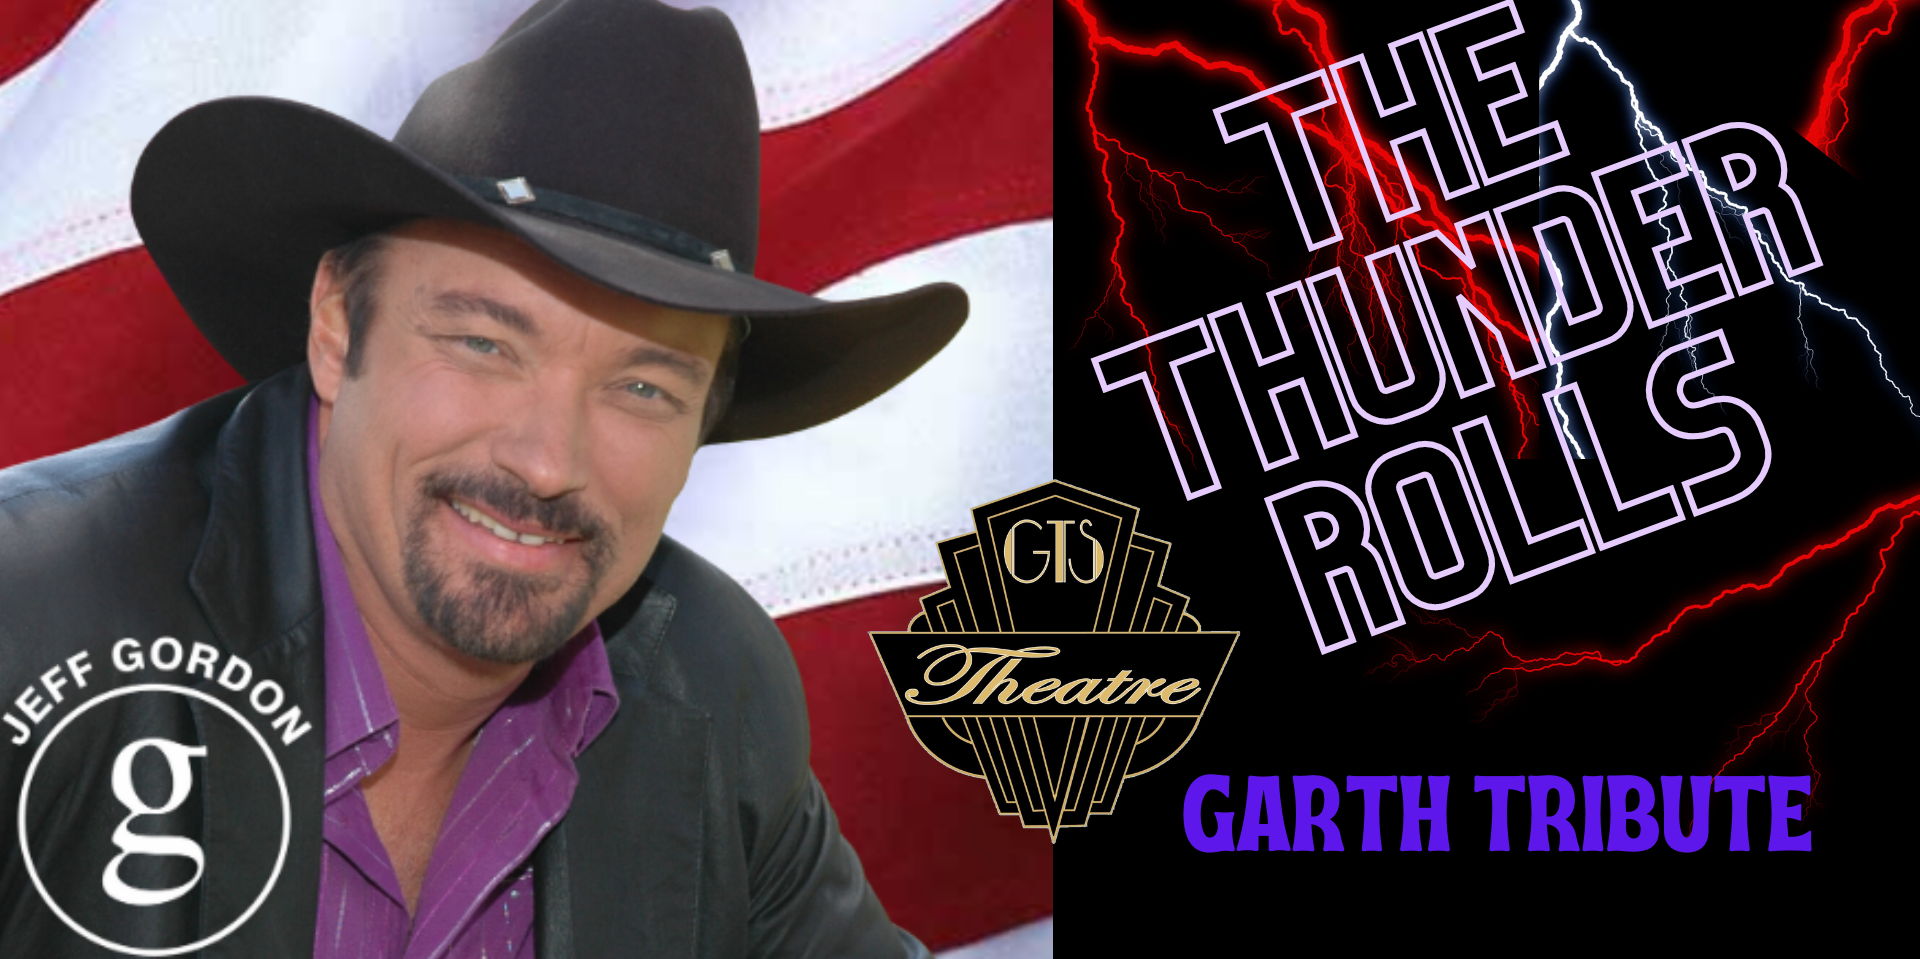 Garth Tribute Show - The Thunder Rolls promotional image